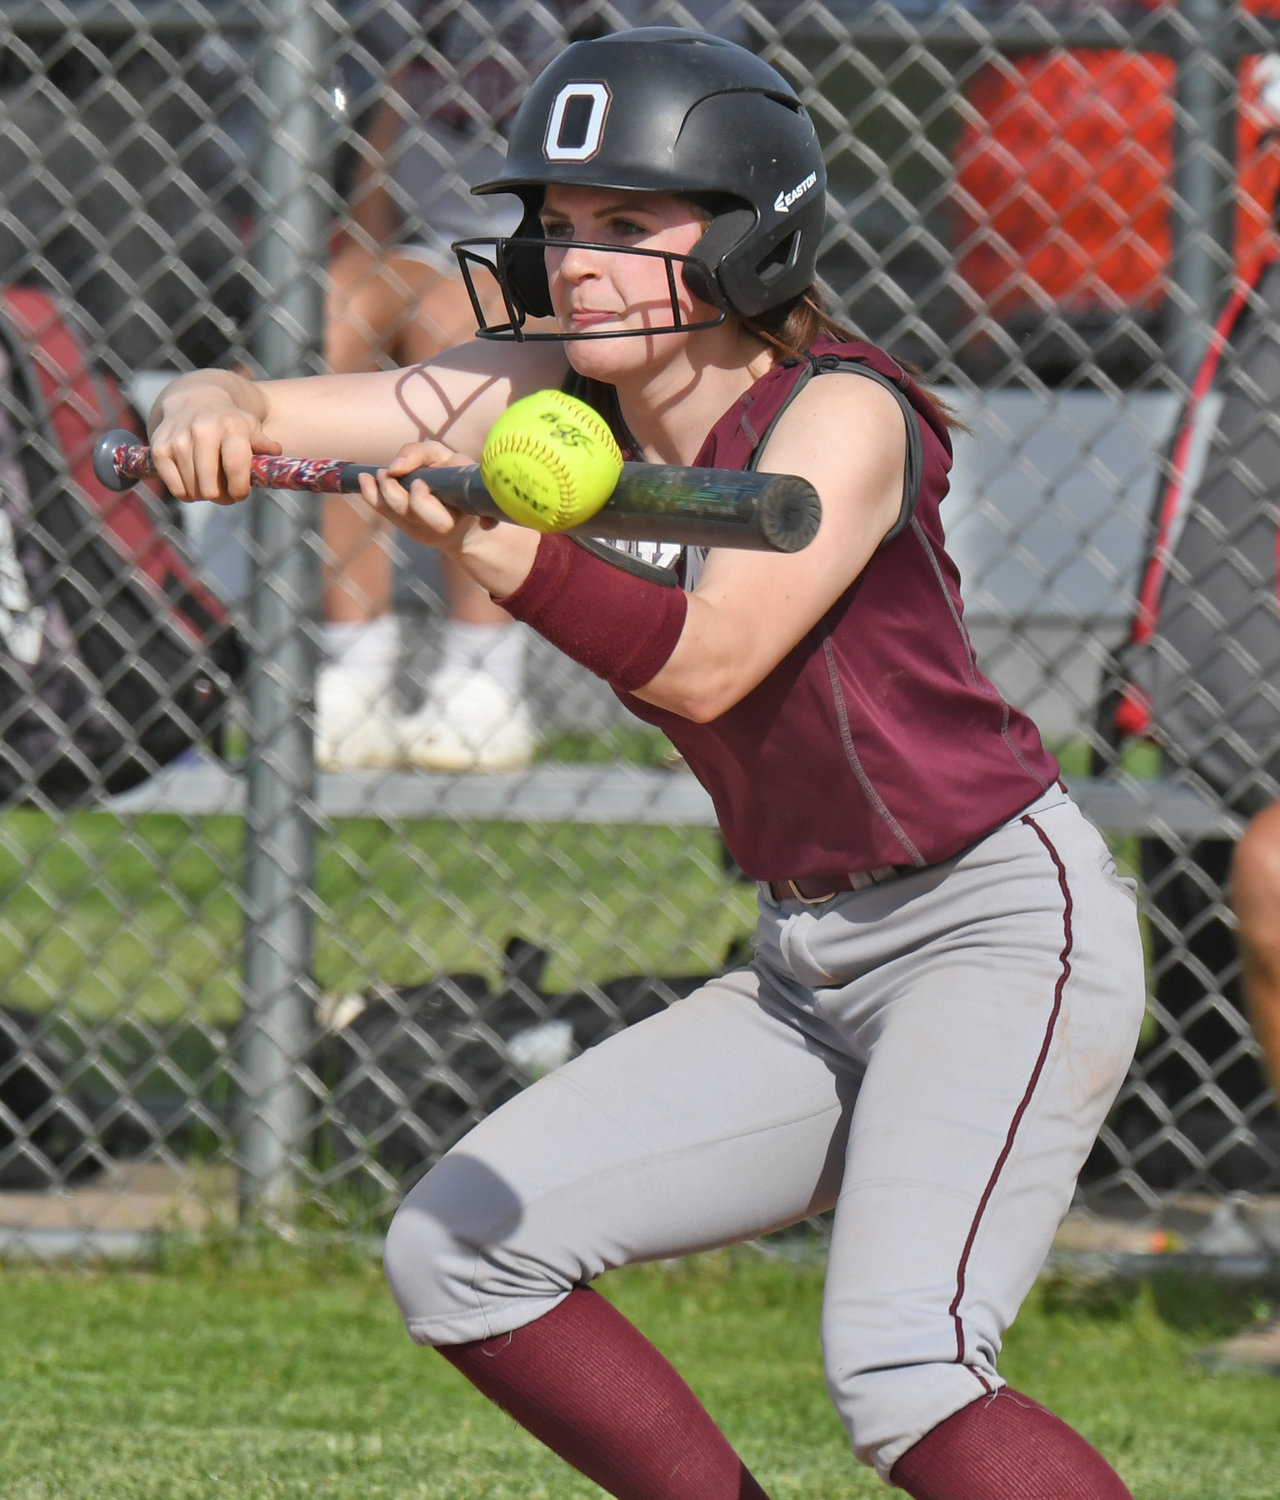 Oriskany's Brooke Matys bunts against Sackets Harbor in a 7-4 win to advance to the Section III Class D semifinals. Matys scored a run to help the team to the win.